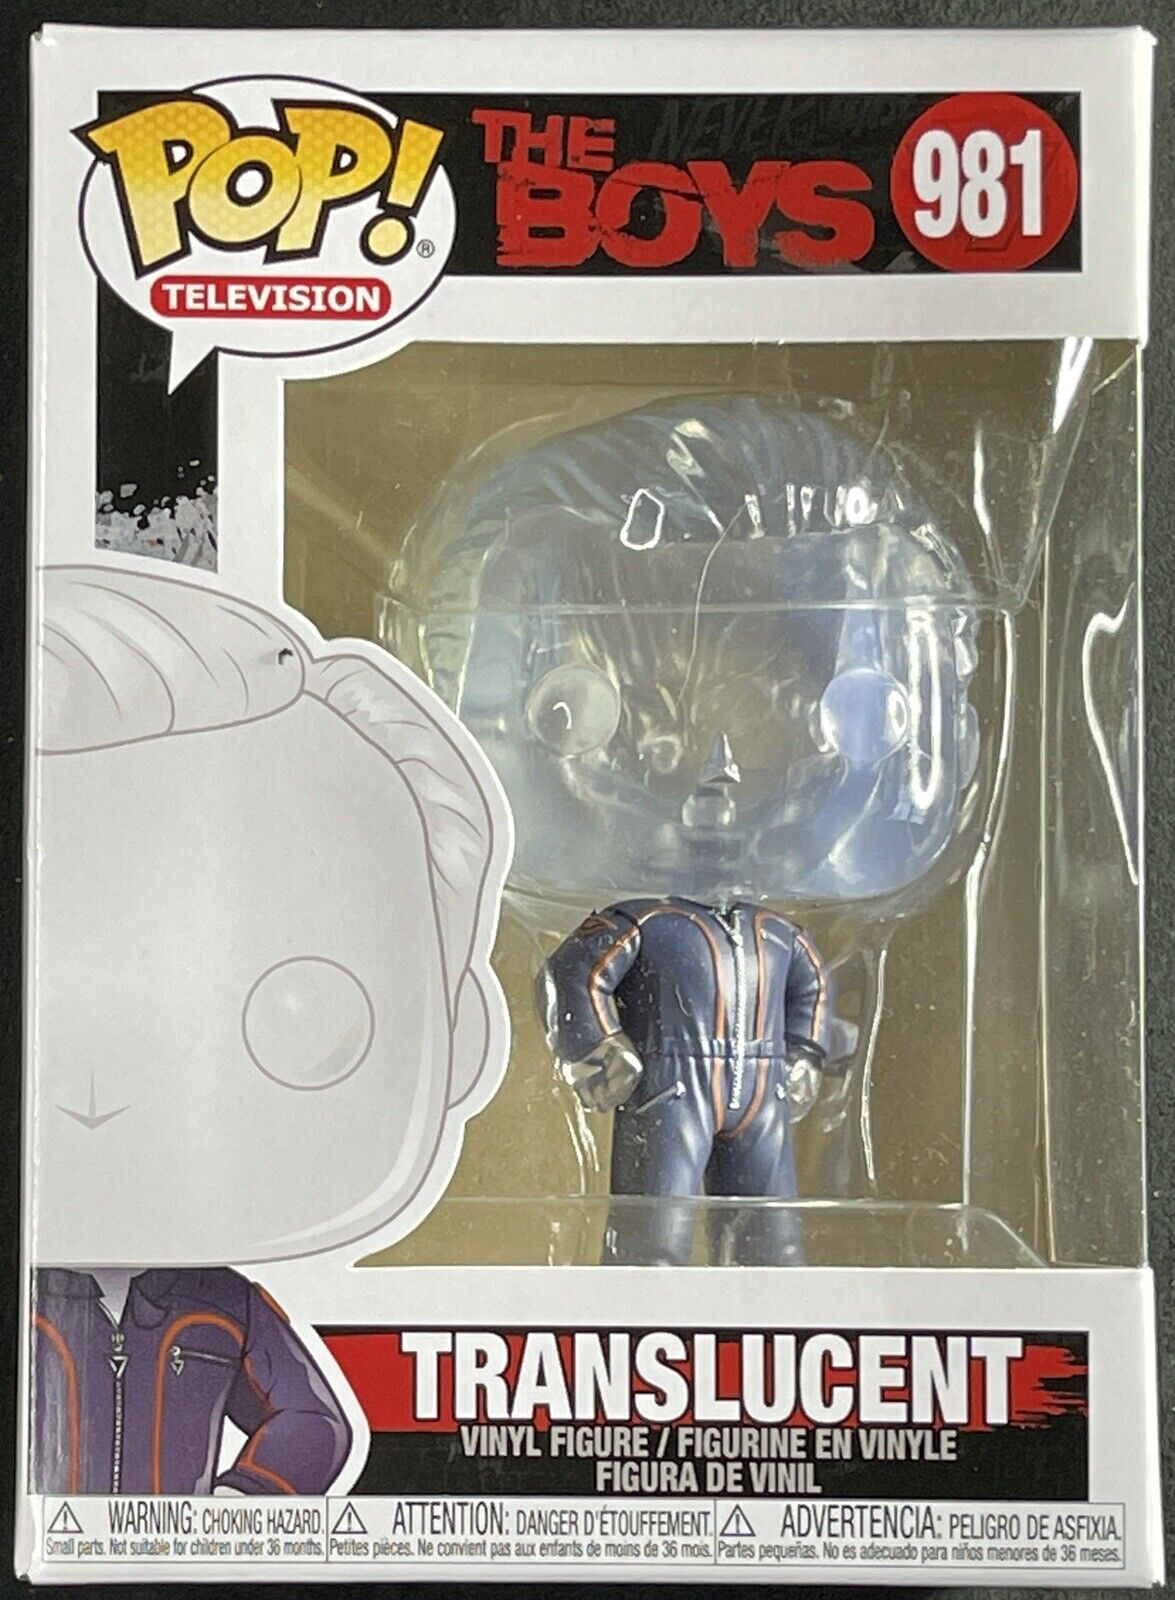 New The Boys TRANSLUCENT #981 The Seven Funko Pop Television W Pop Protector